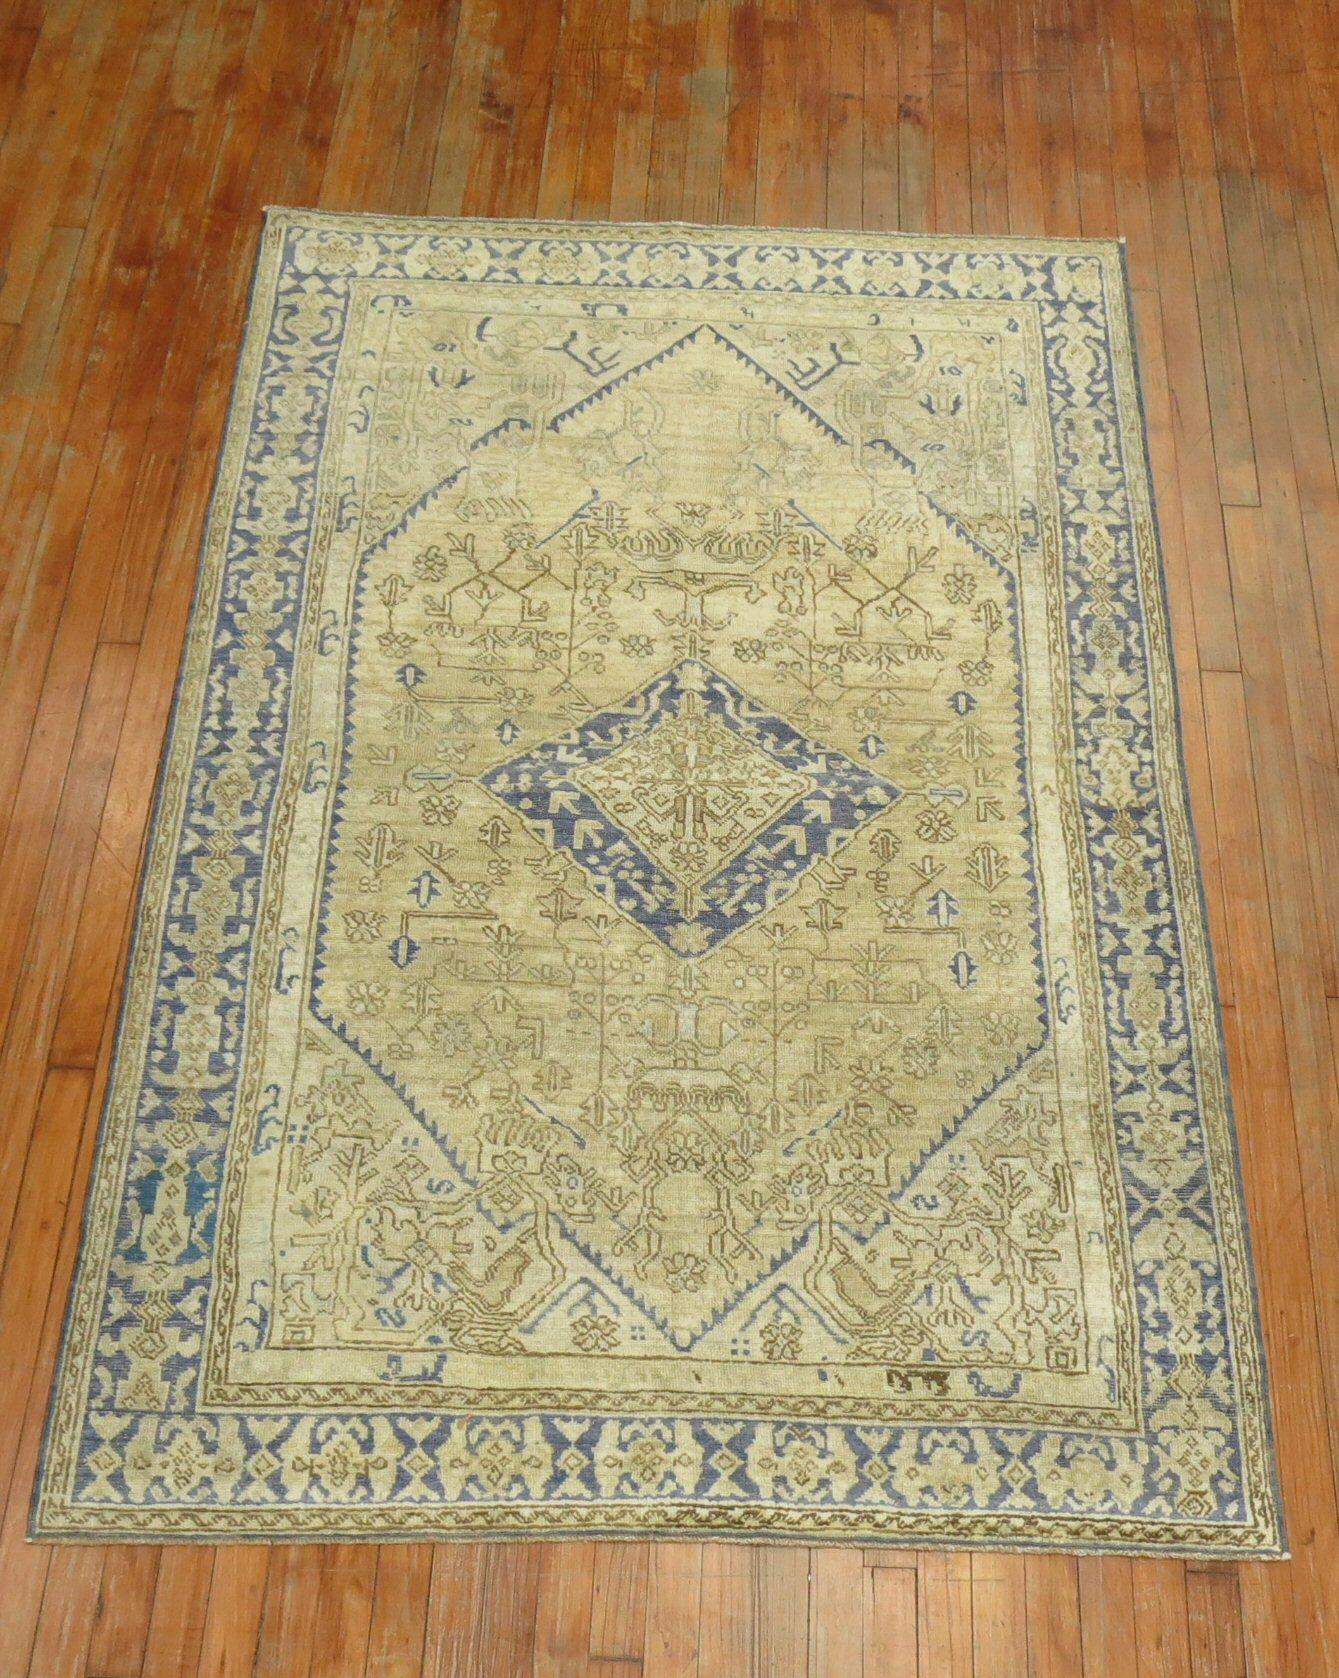 20th century intermediate size traditional rug in blue and taupe tones

Measures: 4'6